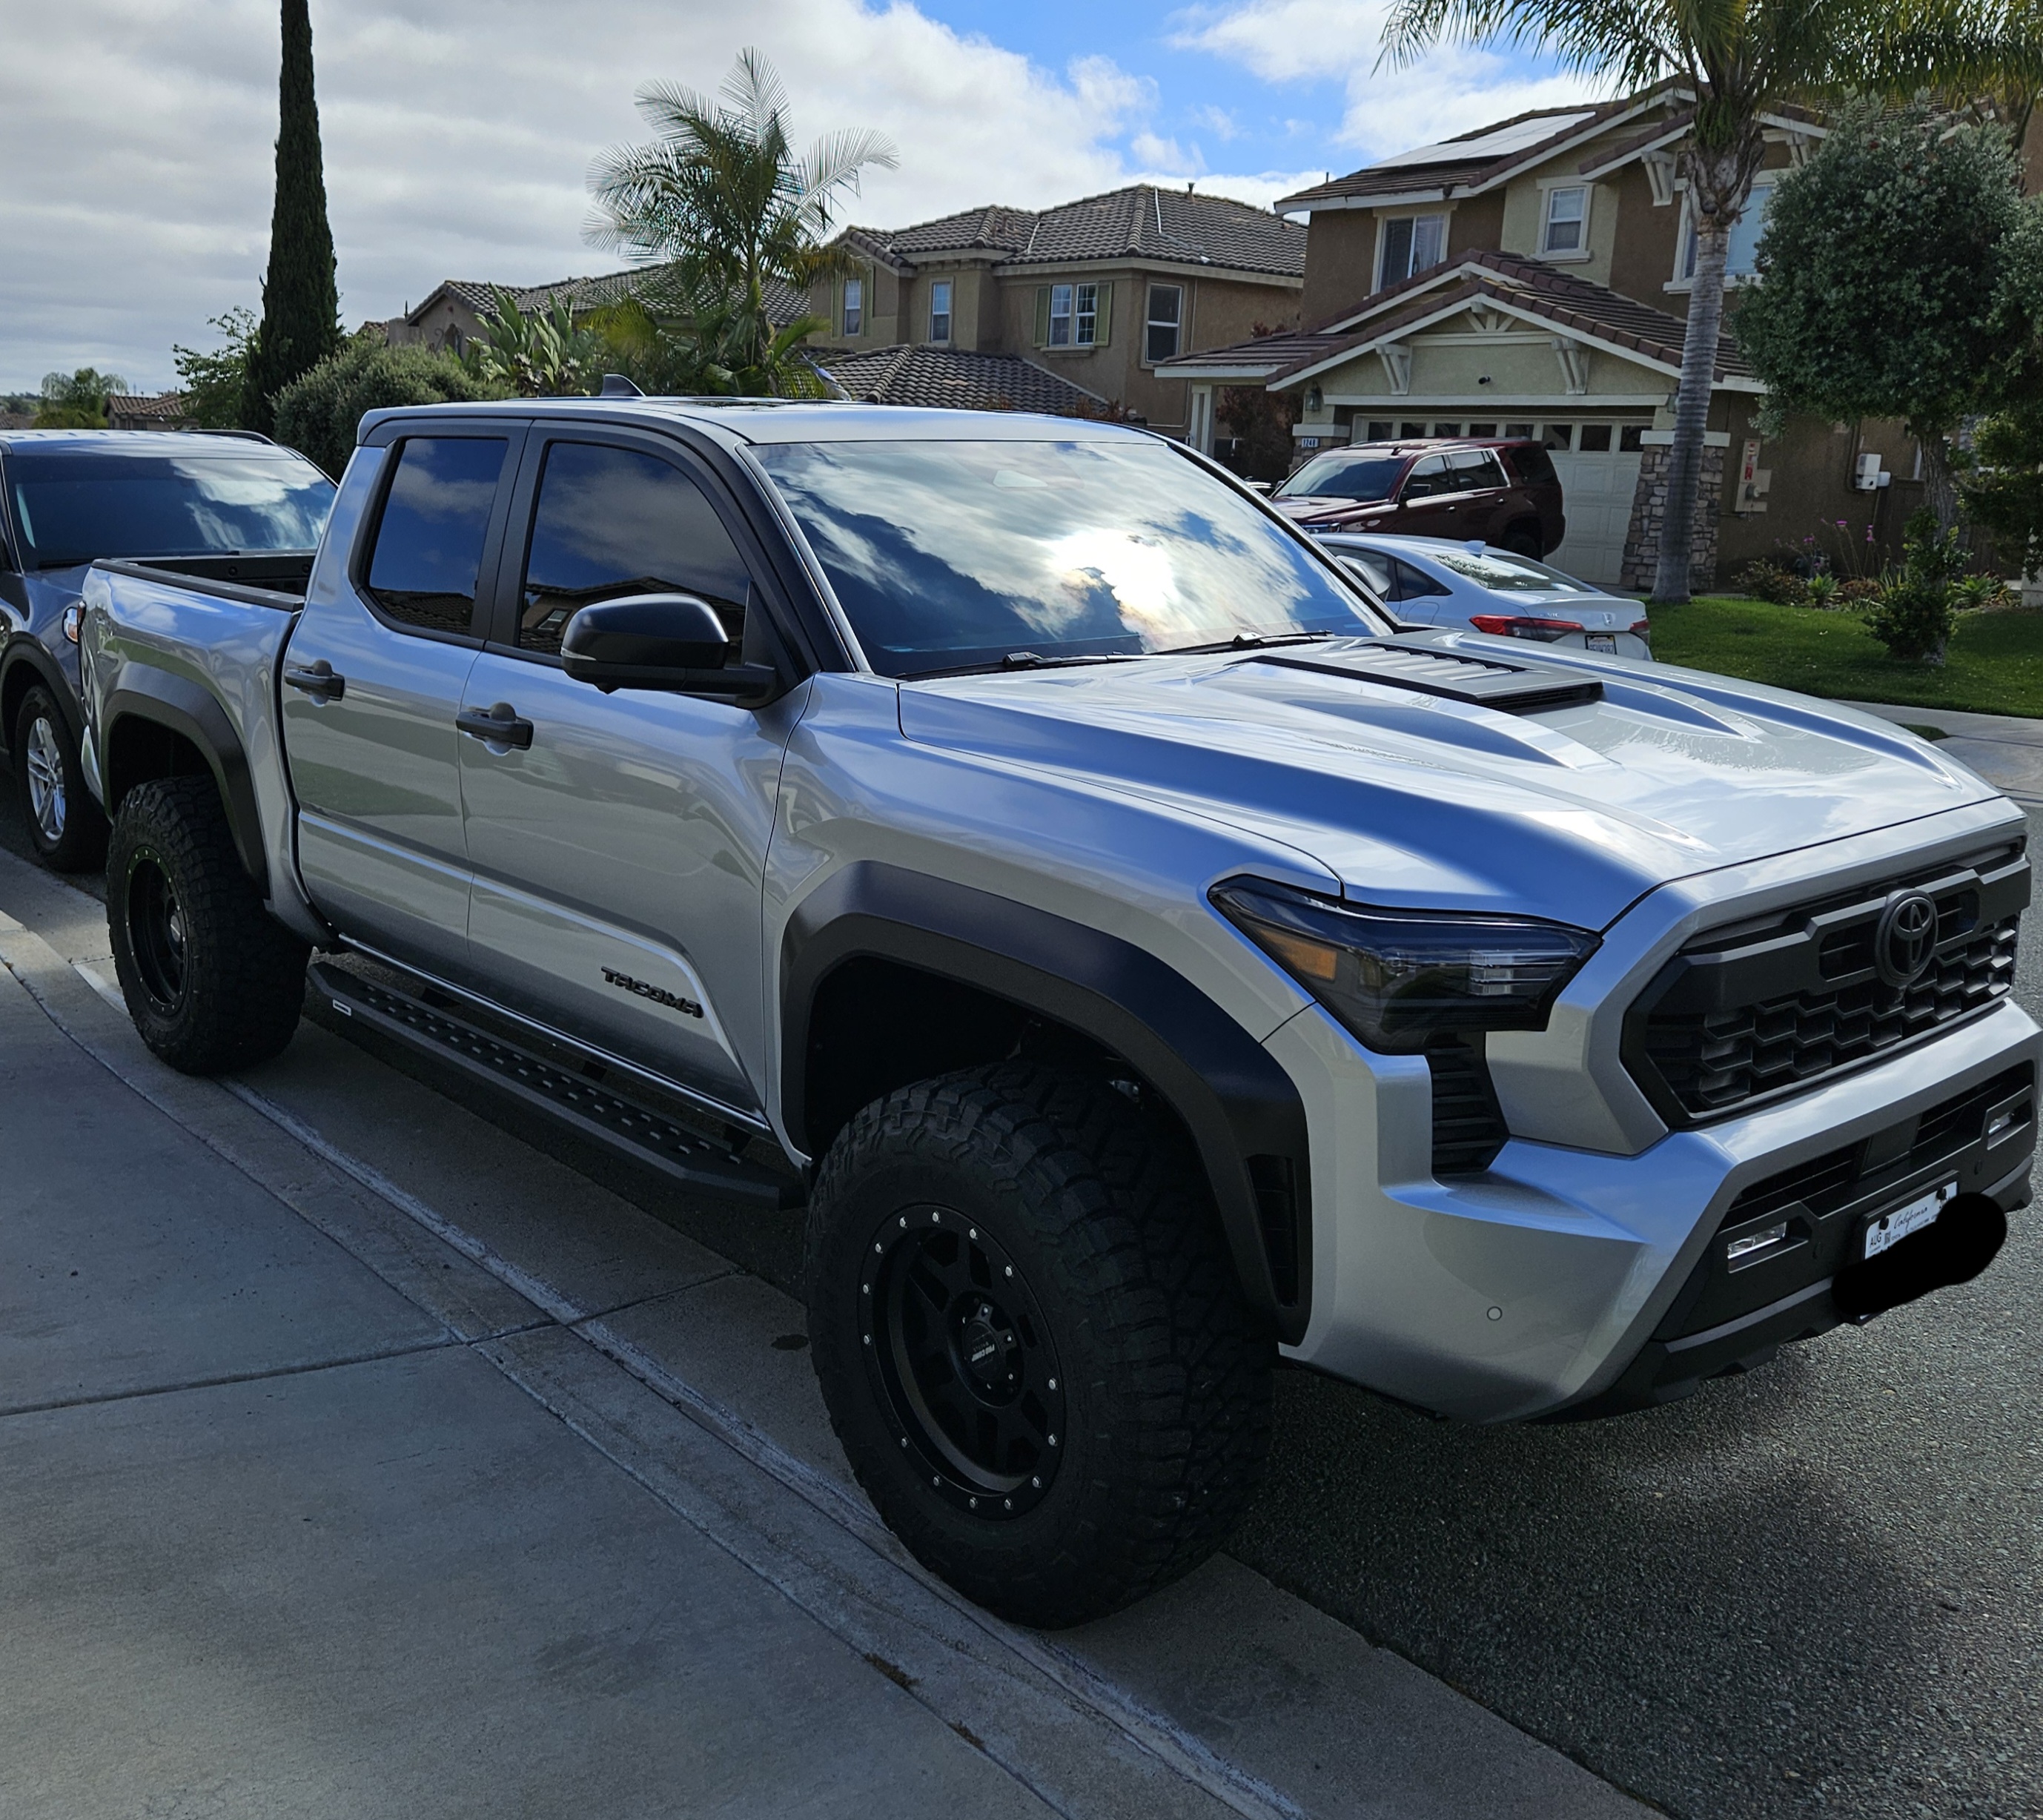 2024 Tacoma 2024 TRD Sport Silver with TRD Pro style Satin Black Wrap on Roof, Pillars, Mirror, Fender Flares 20240525_160113